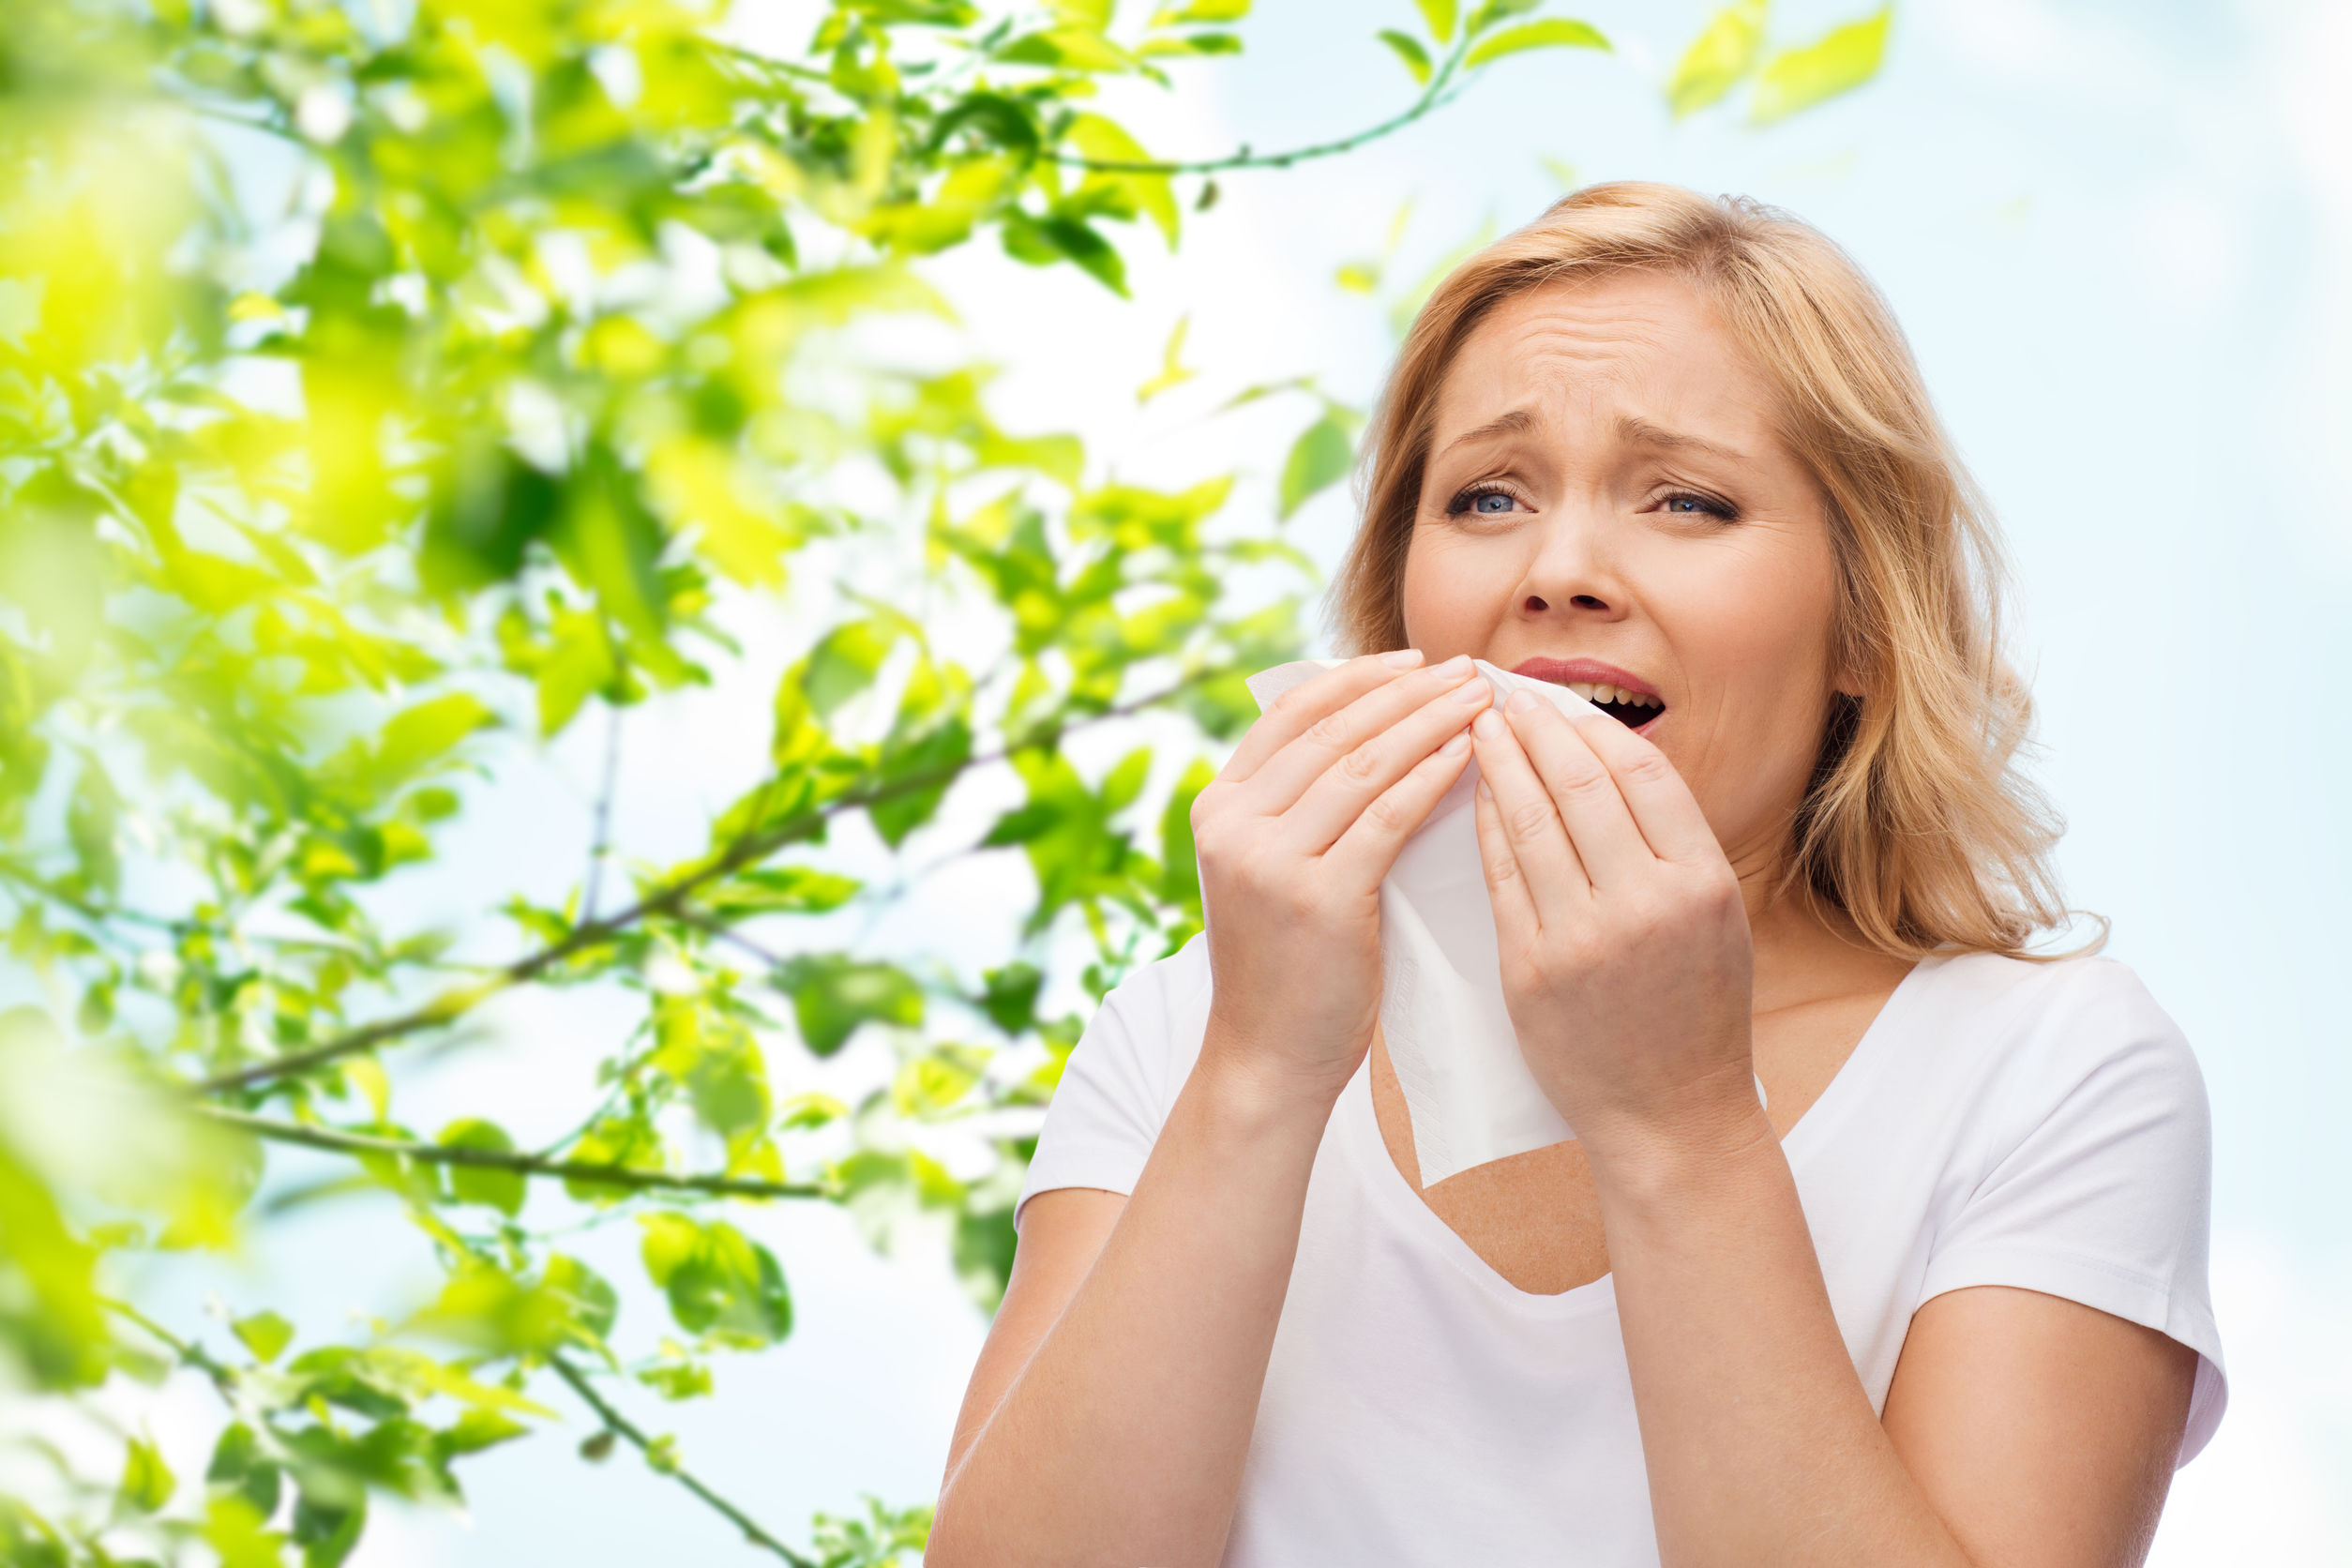 Featured image for “10 Tips for Helping Seasonal Allergies”